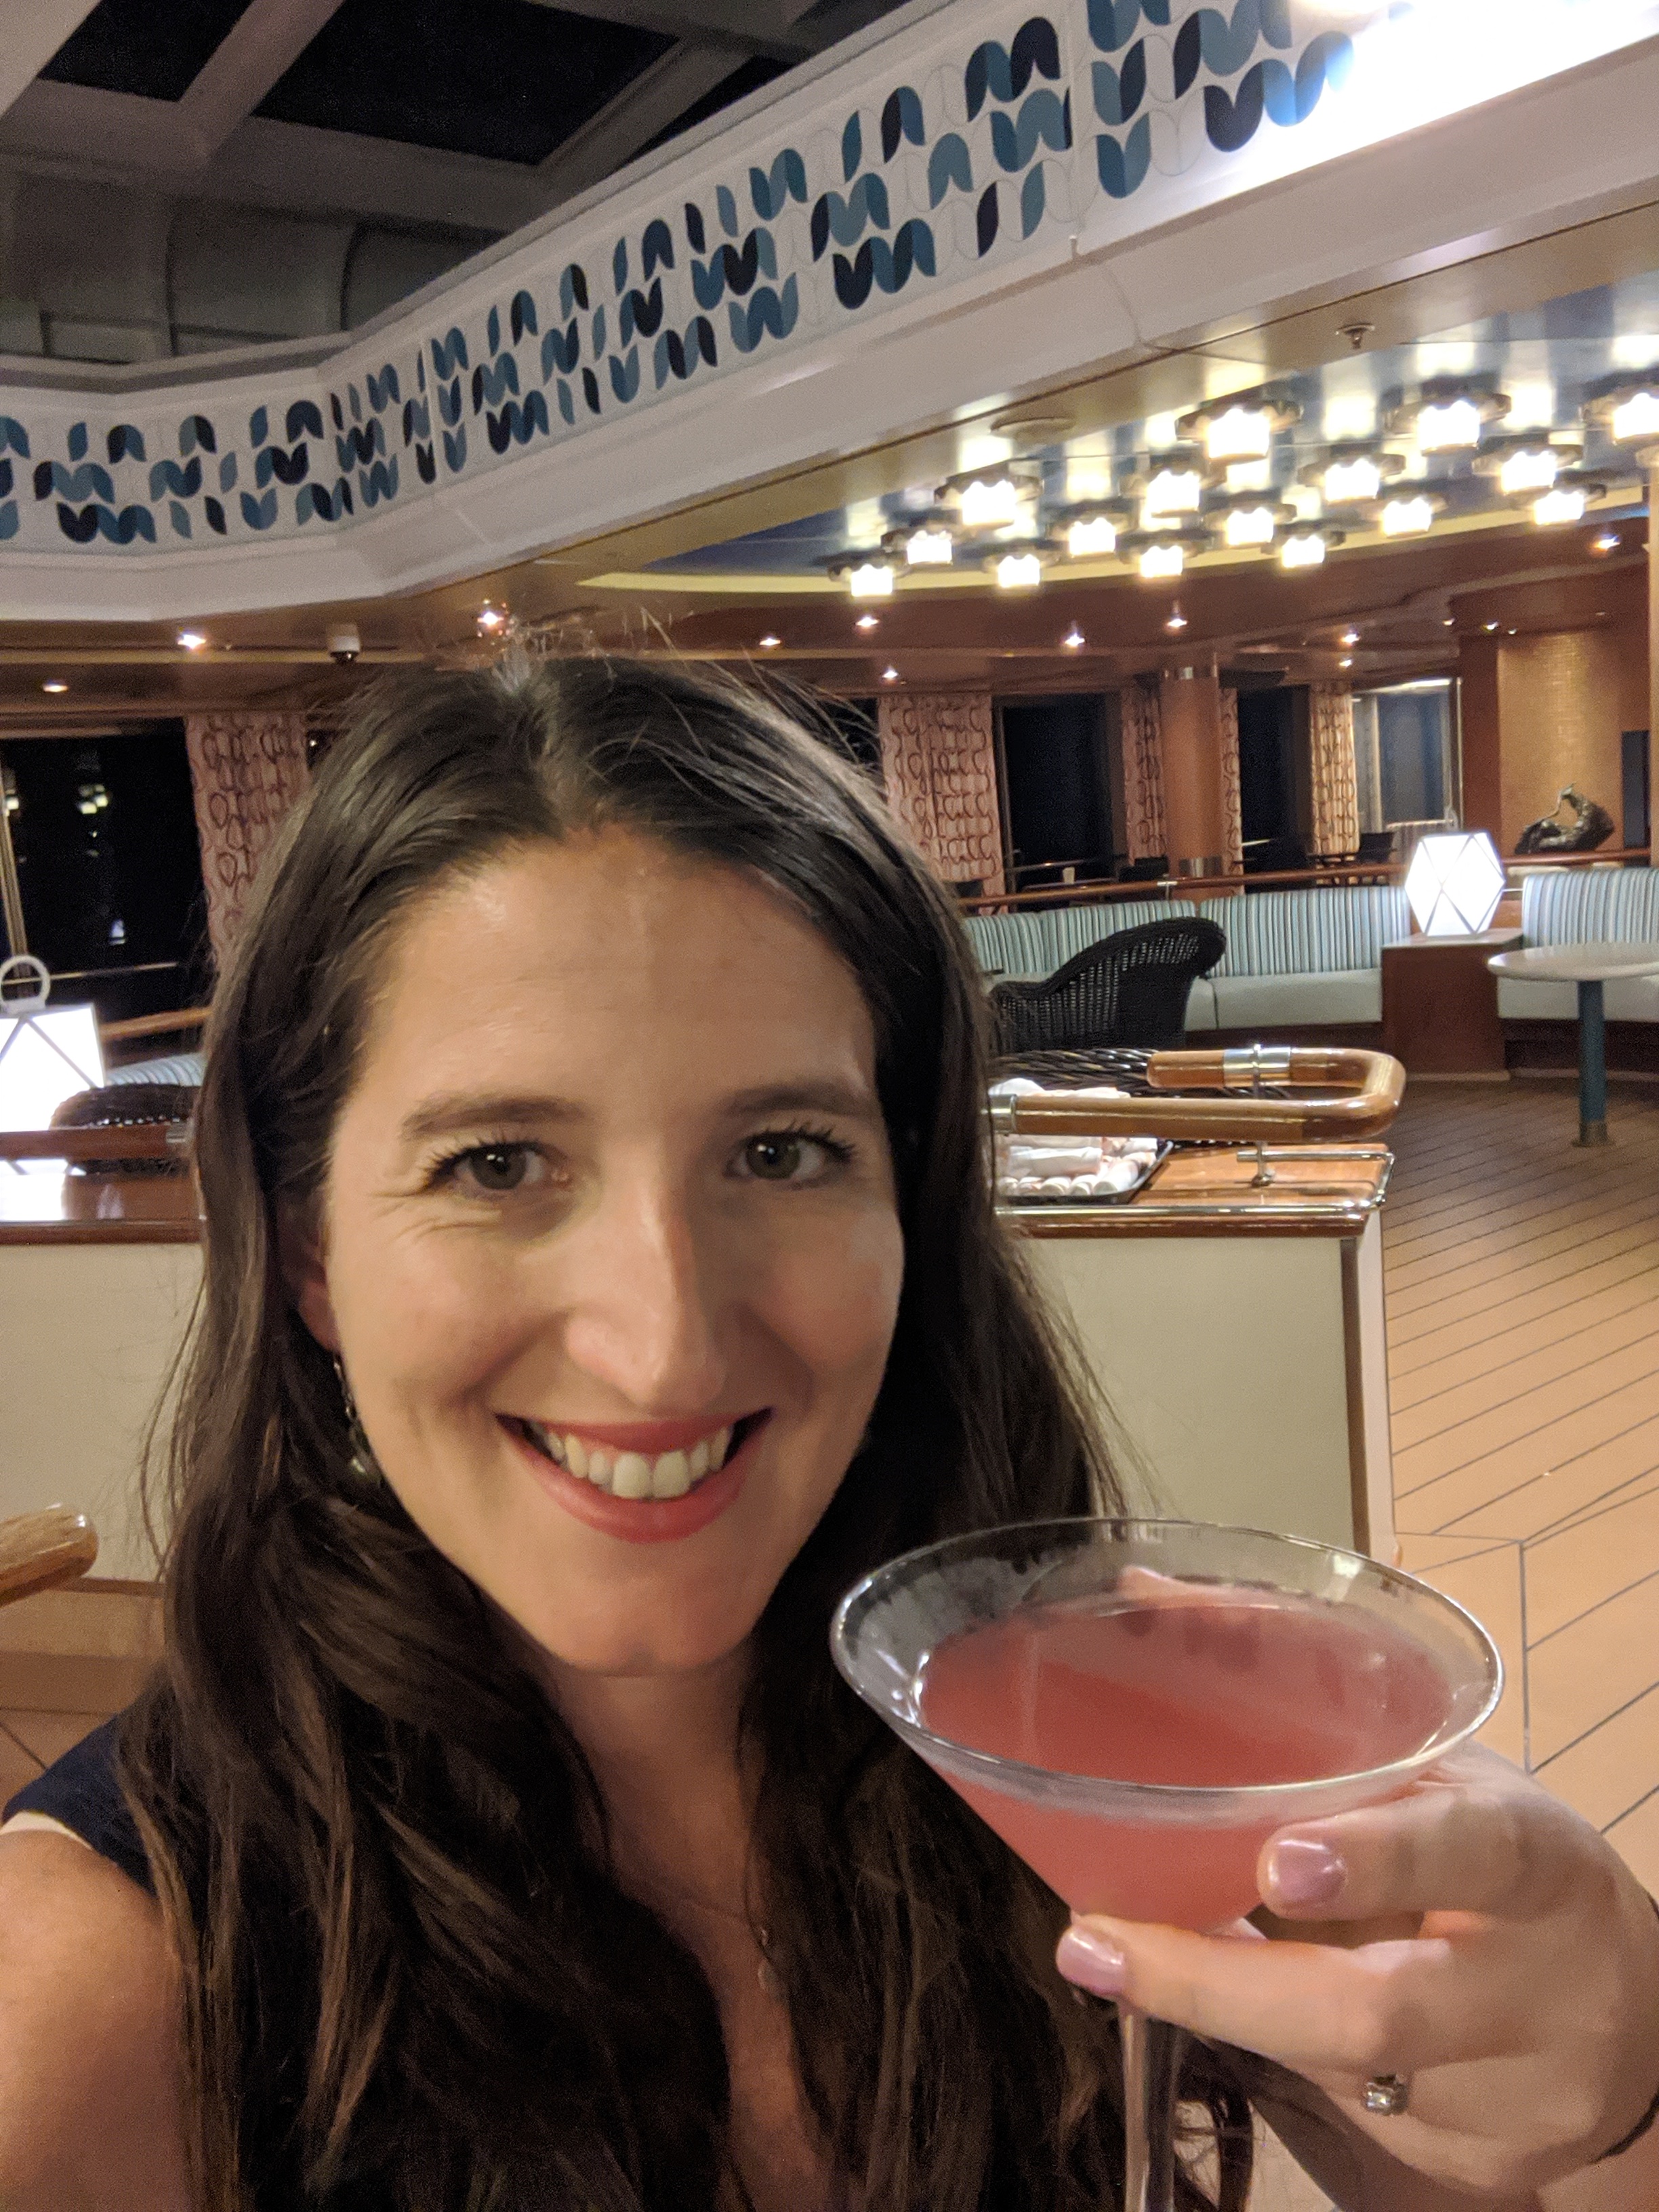 Having a drink during the cruise ship layup. 